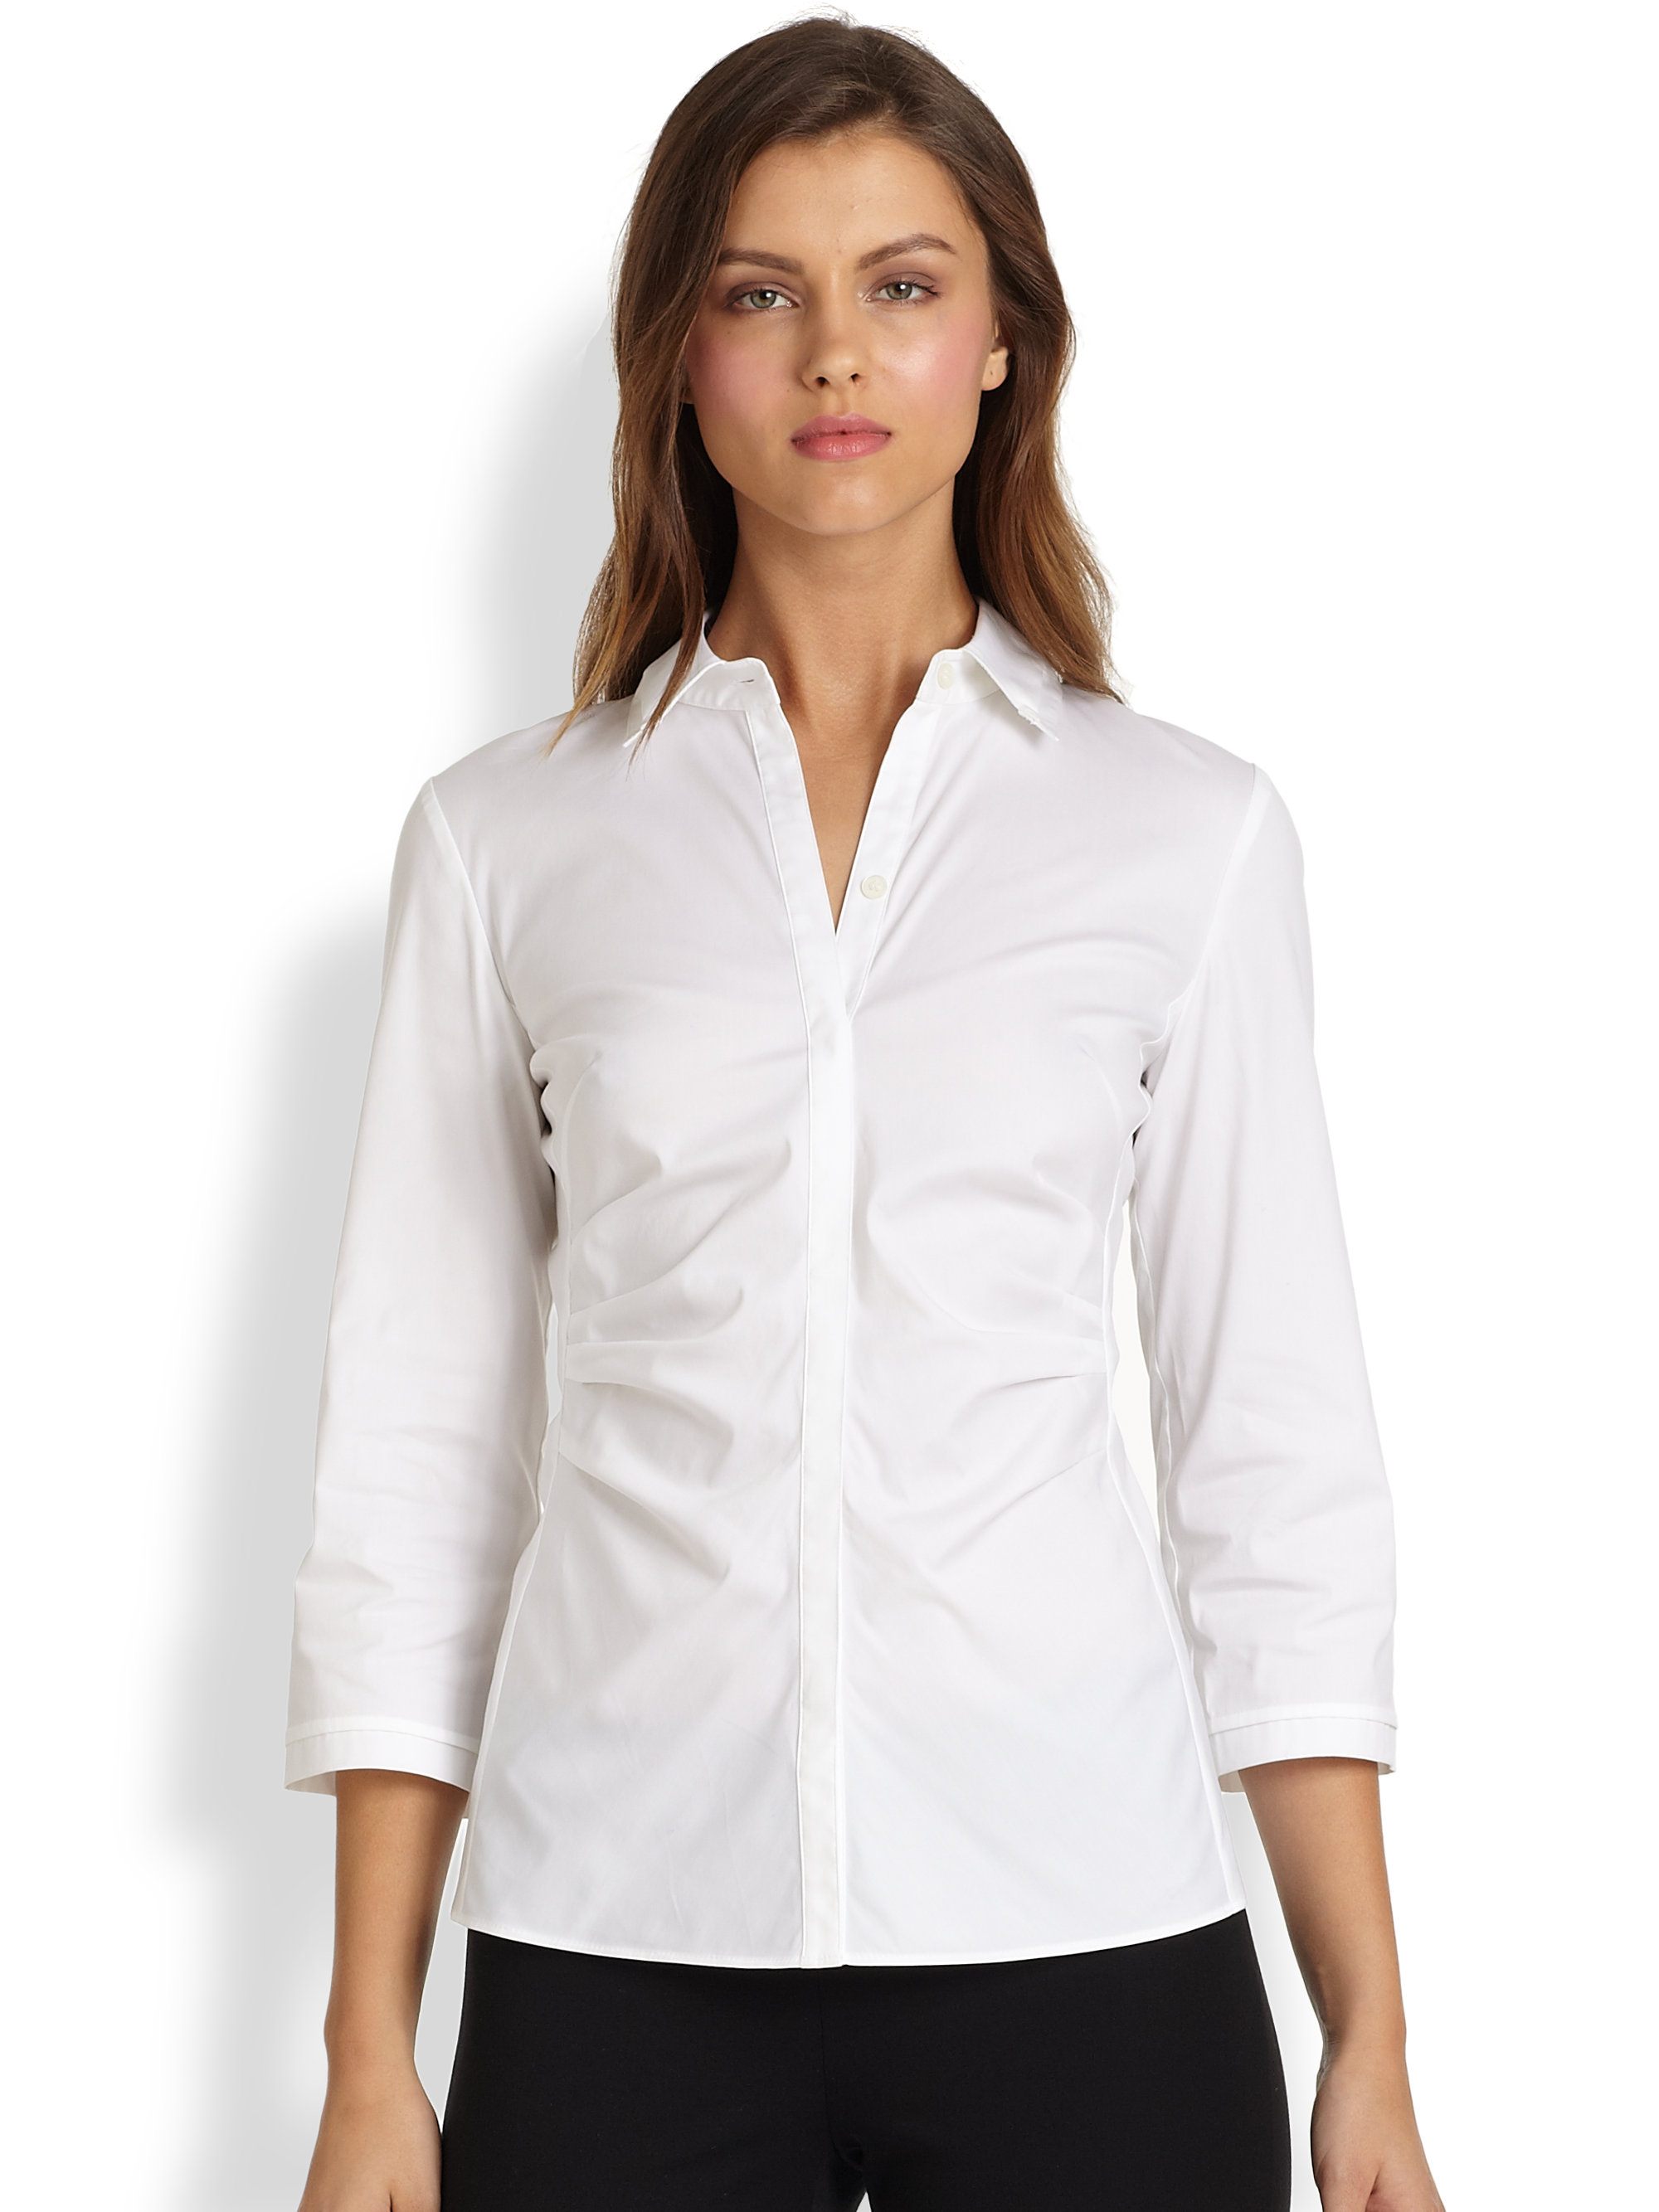 Lyst - Lafayette 148 New York Italian Stretch Cotton Leigh Blouse in White